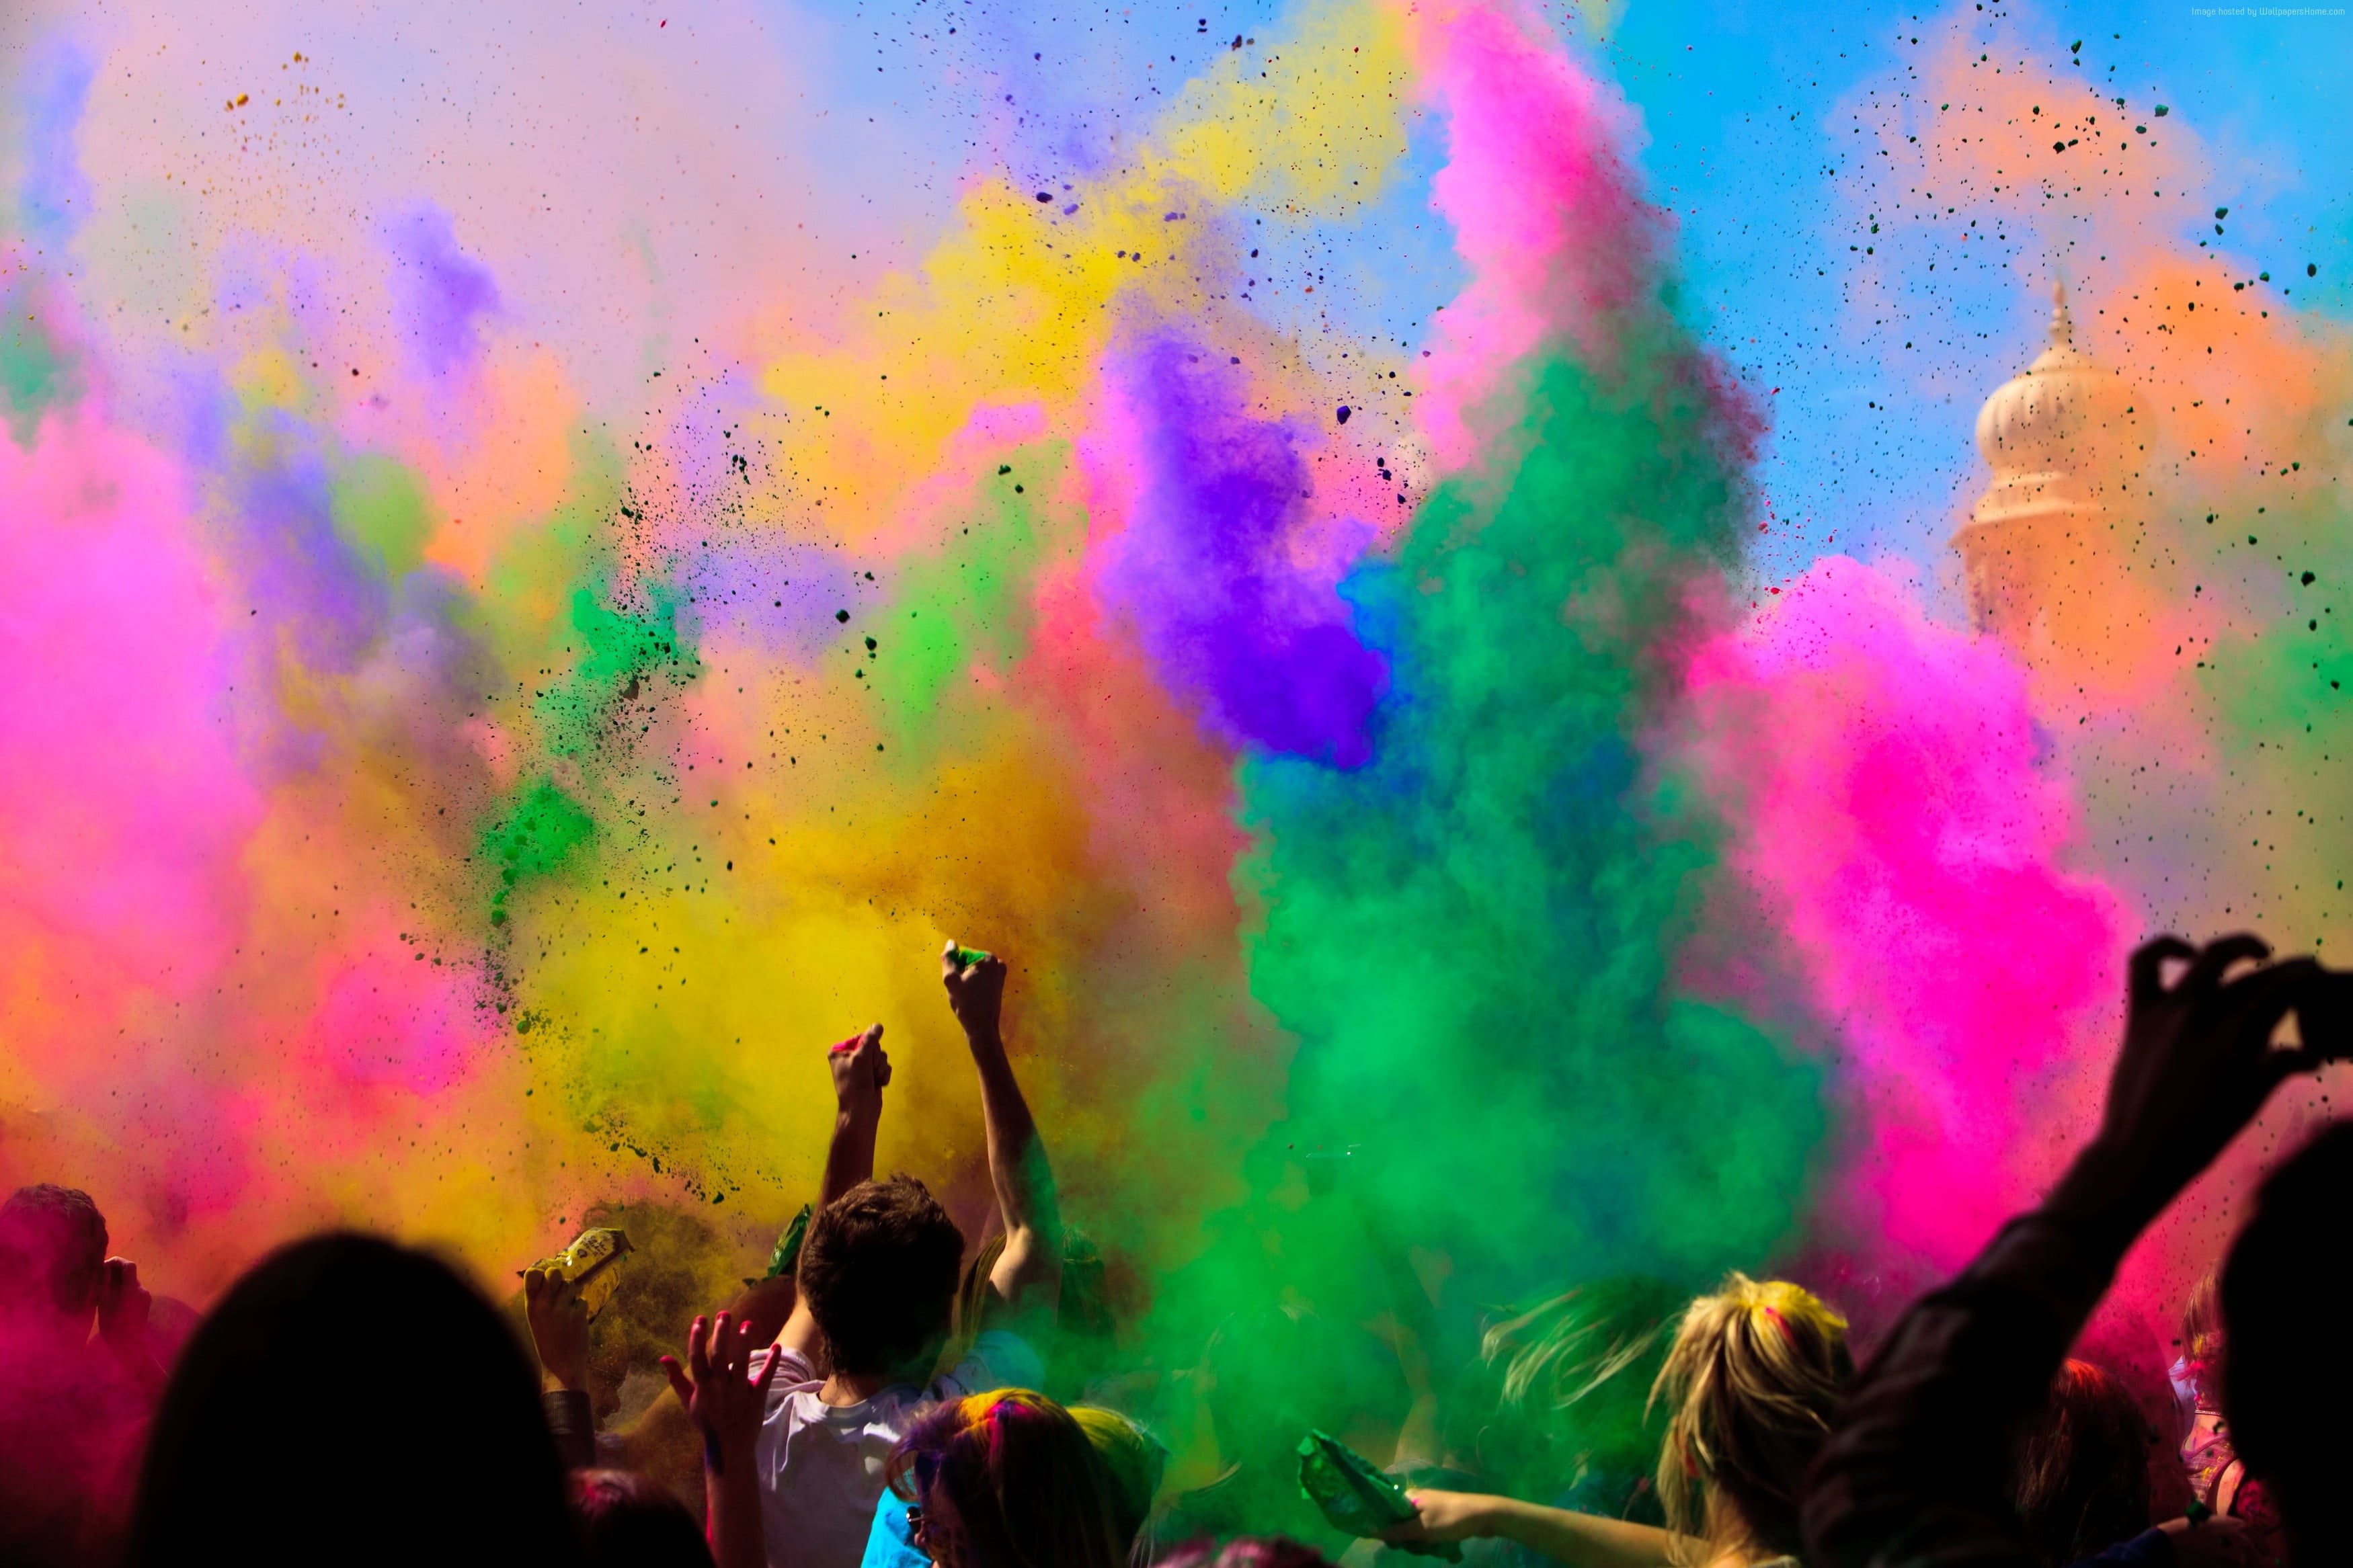 2048x1536 resolution people throwing pink, green, and blue Holi